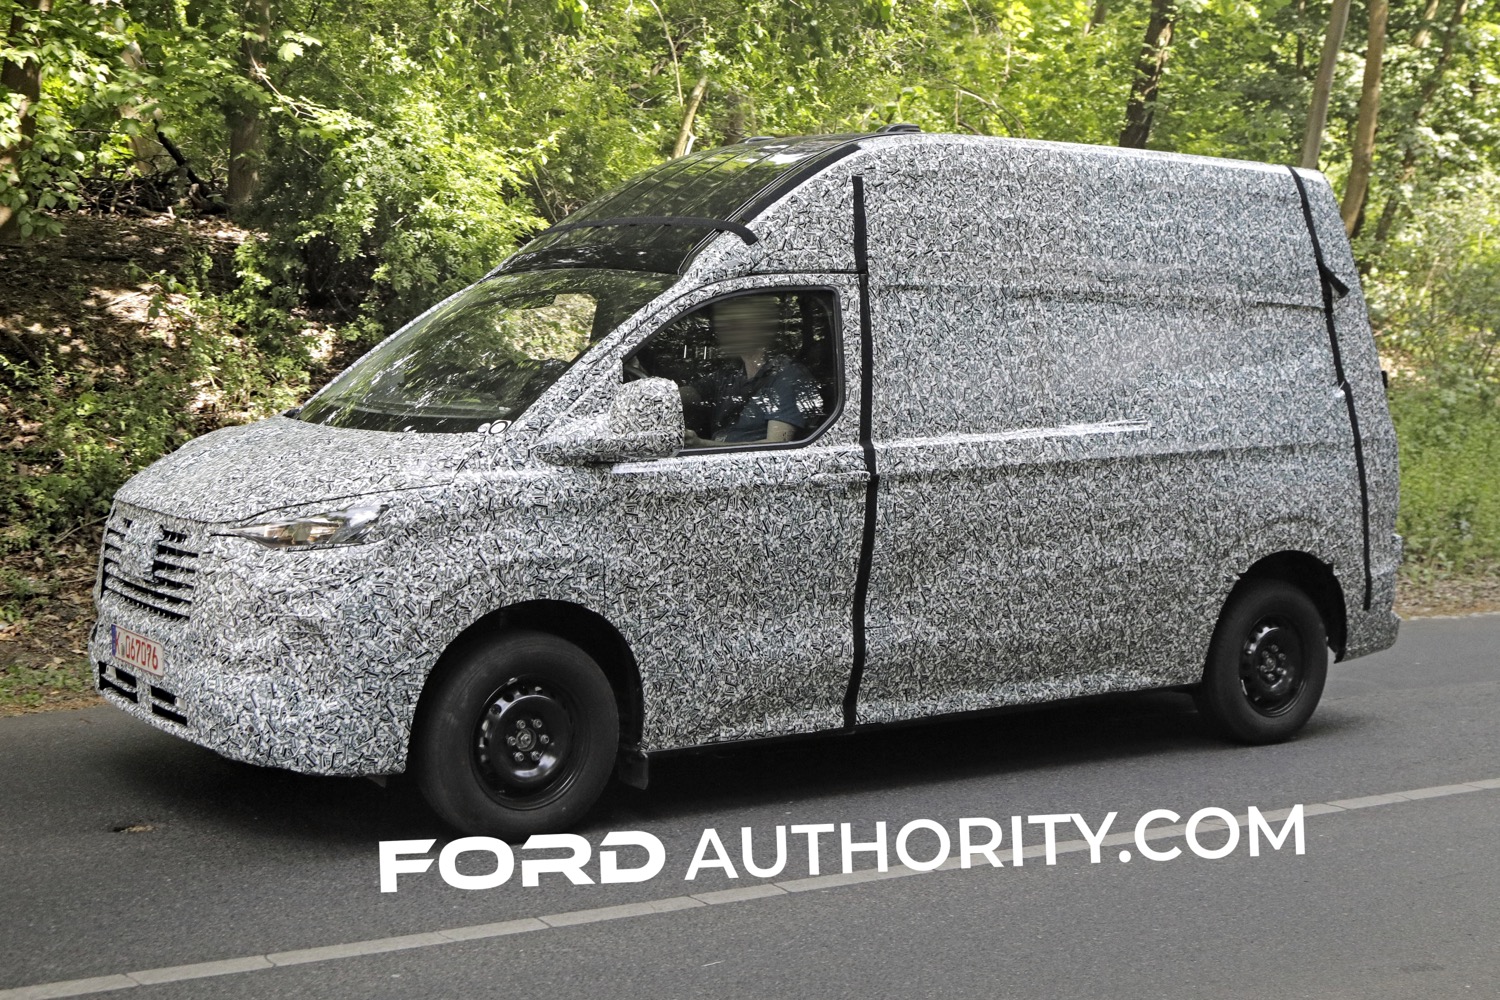 This Clever Custom Ford Transit Build Smartly put $$$ where it